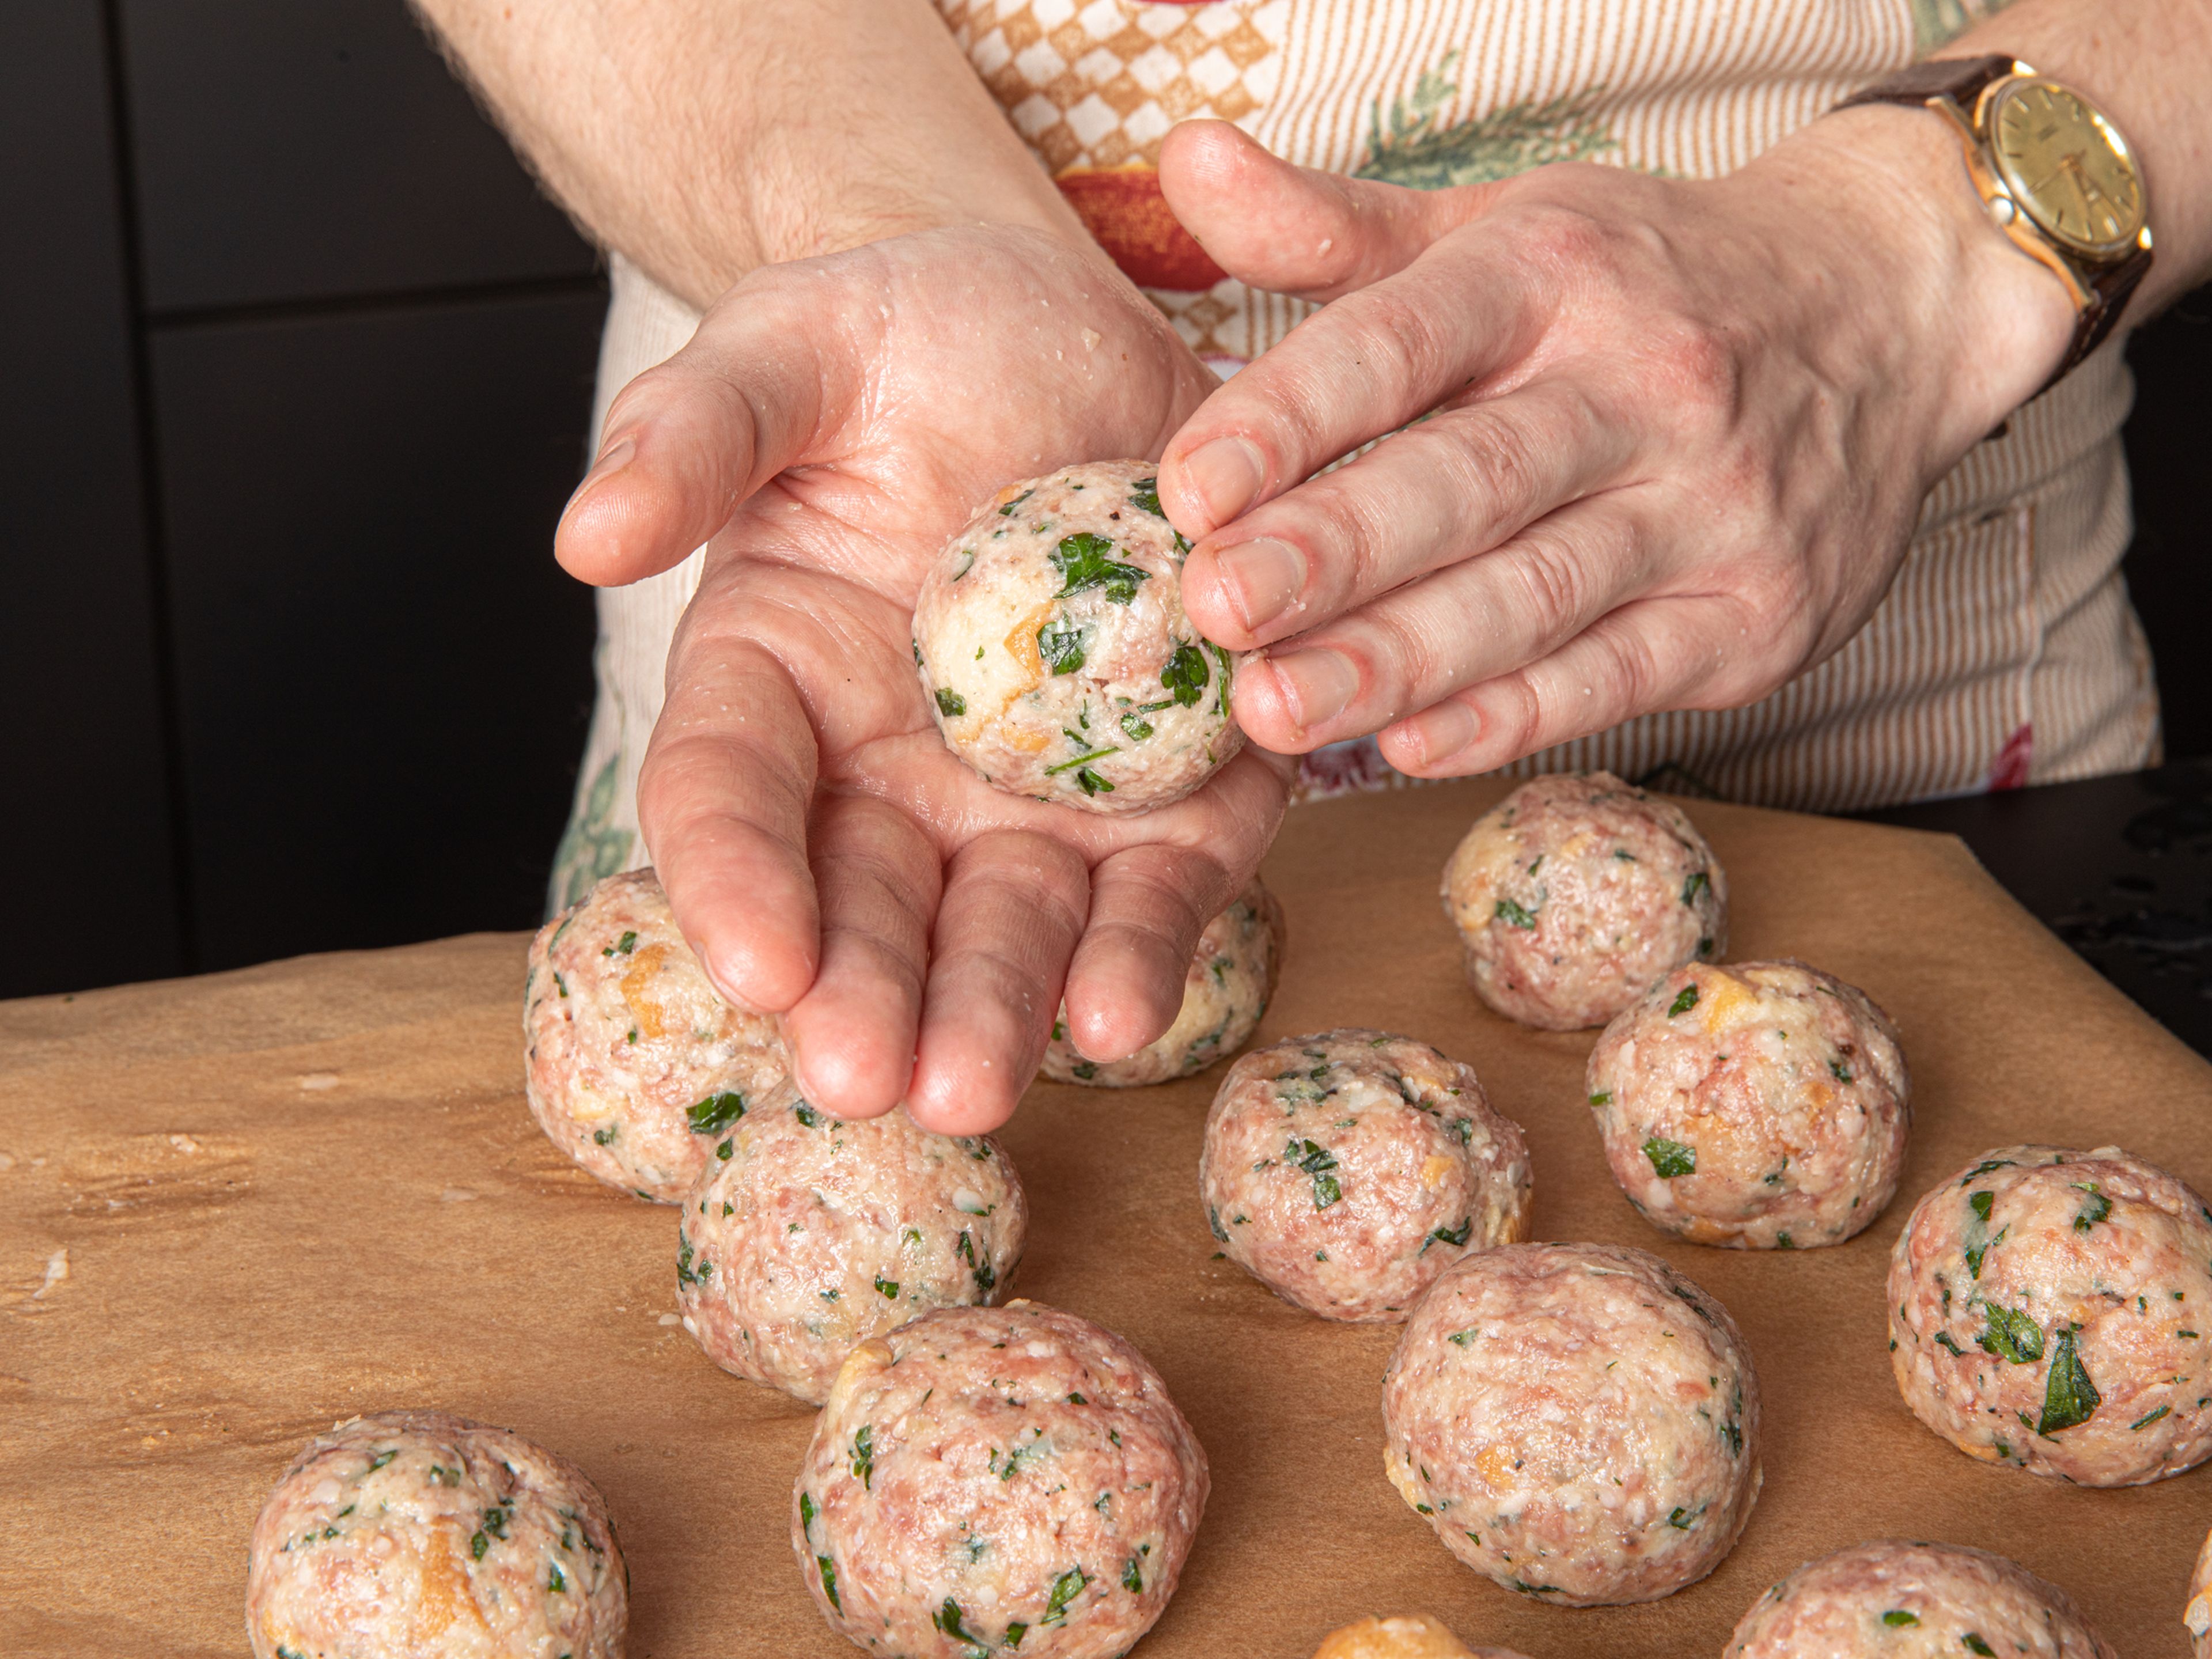 In the meantime, fill a bowl with water and line a baking sheet or cutting board with baking paper. Form approx. 20 meatballs the size of table tennis balls, by gently rotating the mixture between wet hands, then place on the baking paper.